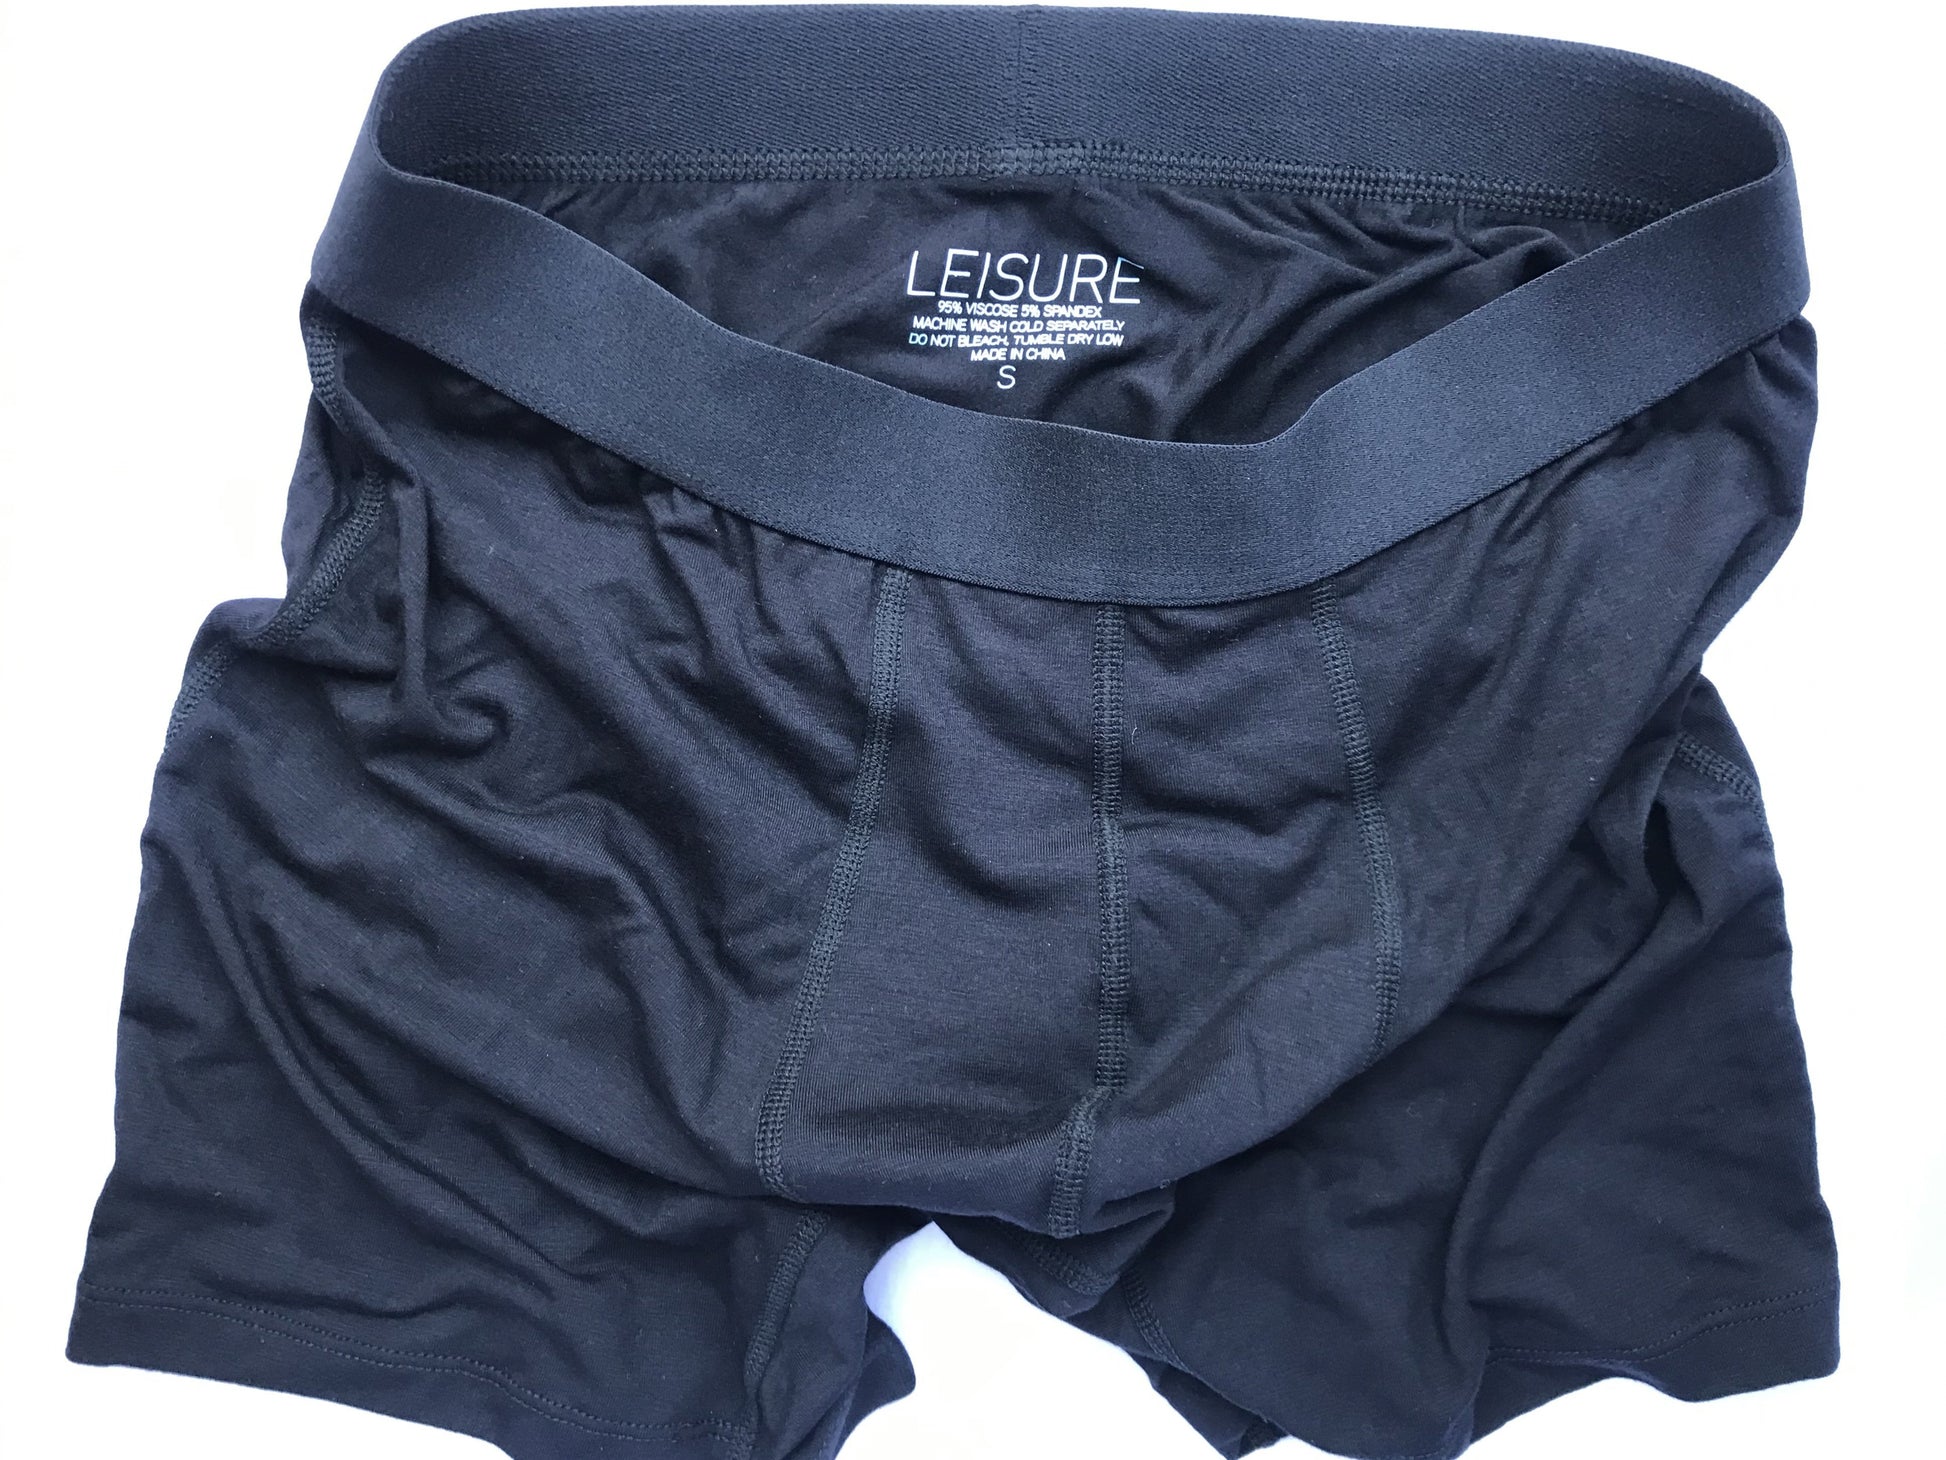 Men's Best Boxer Briefs. LEISURE OF NYC's Lightweight Soft Viscose Fabric.  – Leisure of NYC